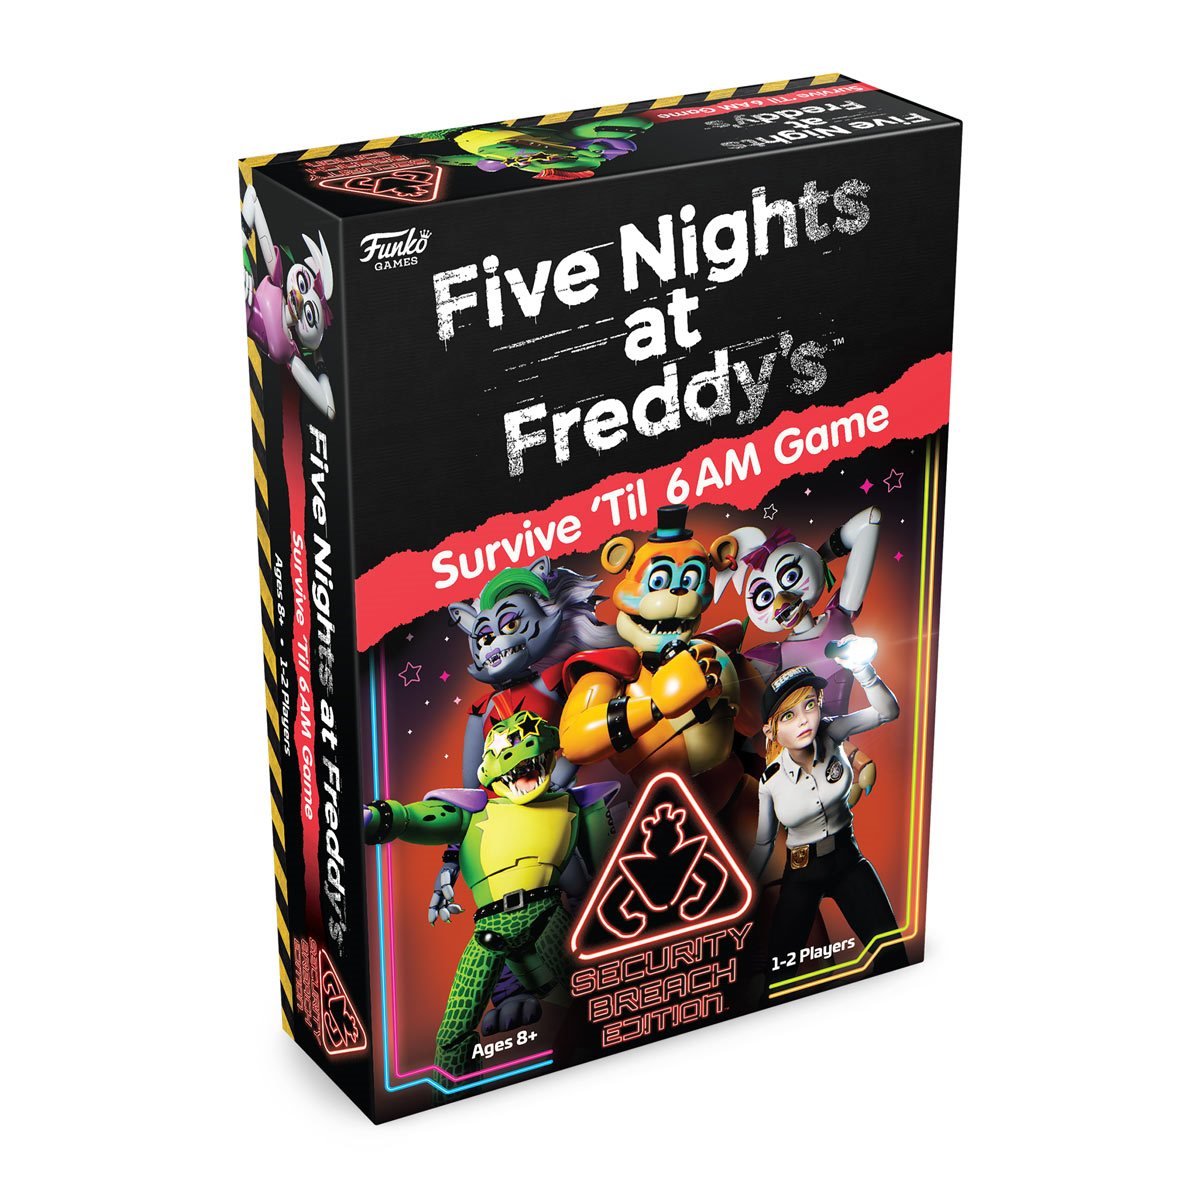 Something Wild! Five Nights at Freddy's - Security Breach